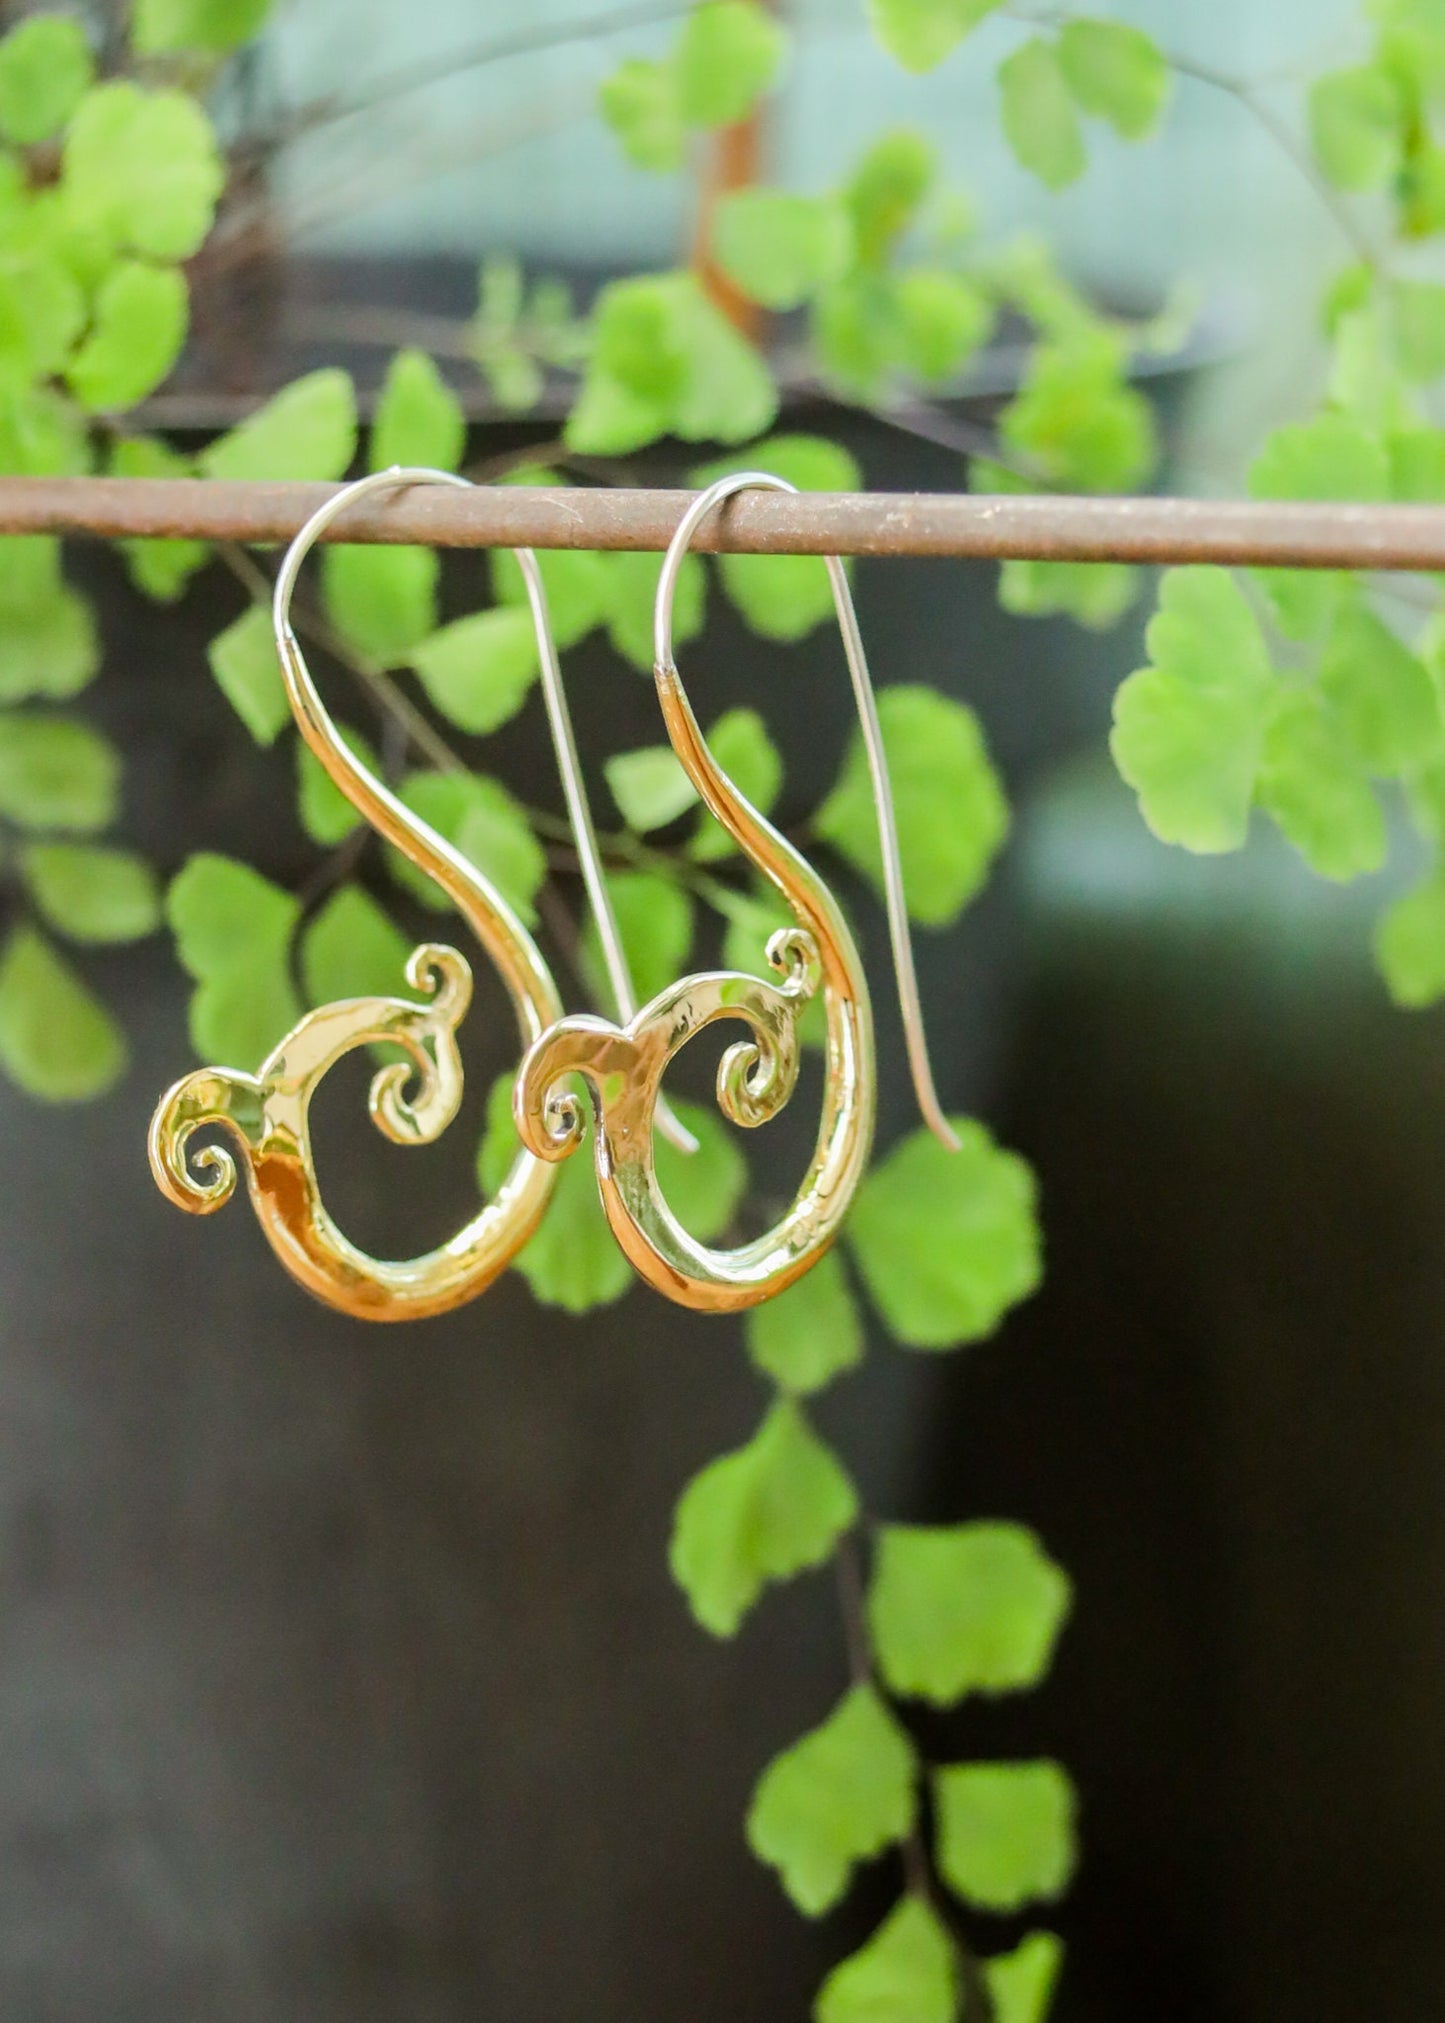 Brass Wave Spiral Earrings | Geometric Ocean Nature Inspired Jewelry | Elven Fairycore Whimsical Fantasy Cottagecore | Boho Gold Tone Hoops